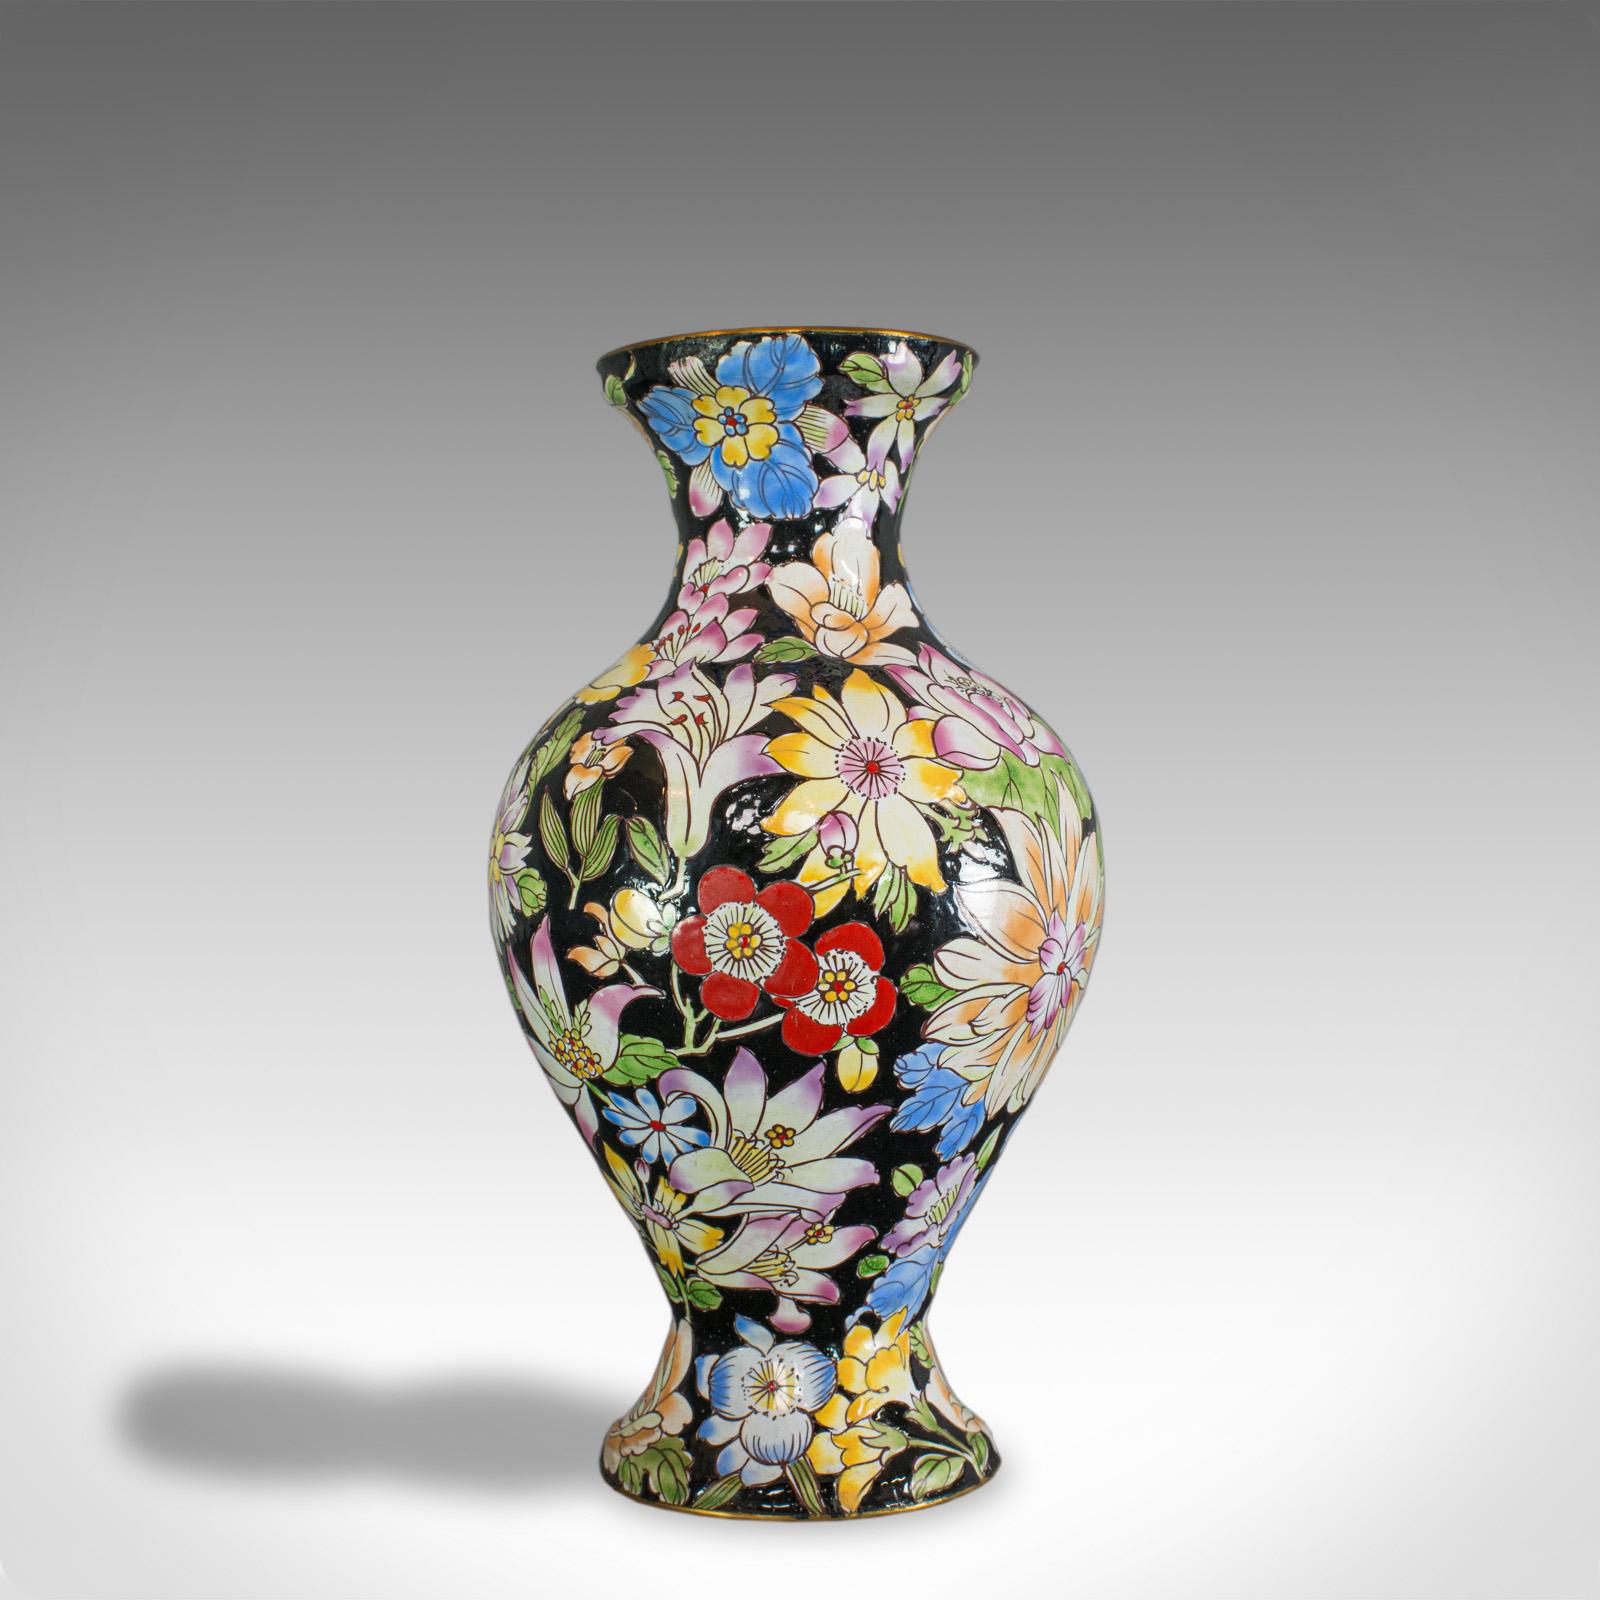 This is an antique decorative vase. A French, cloisonné baluster urn, dating to the Victorian period of the late 19th century, circa 1880.

Pleasing example of French cloisonné
Profusely decorated with foliate detail
Rich colorful palette on a